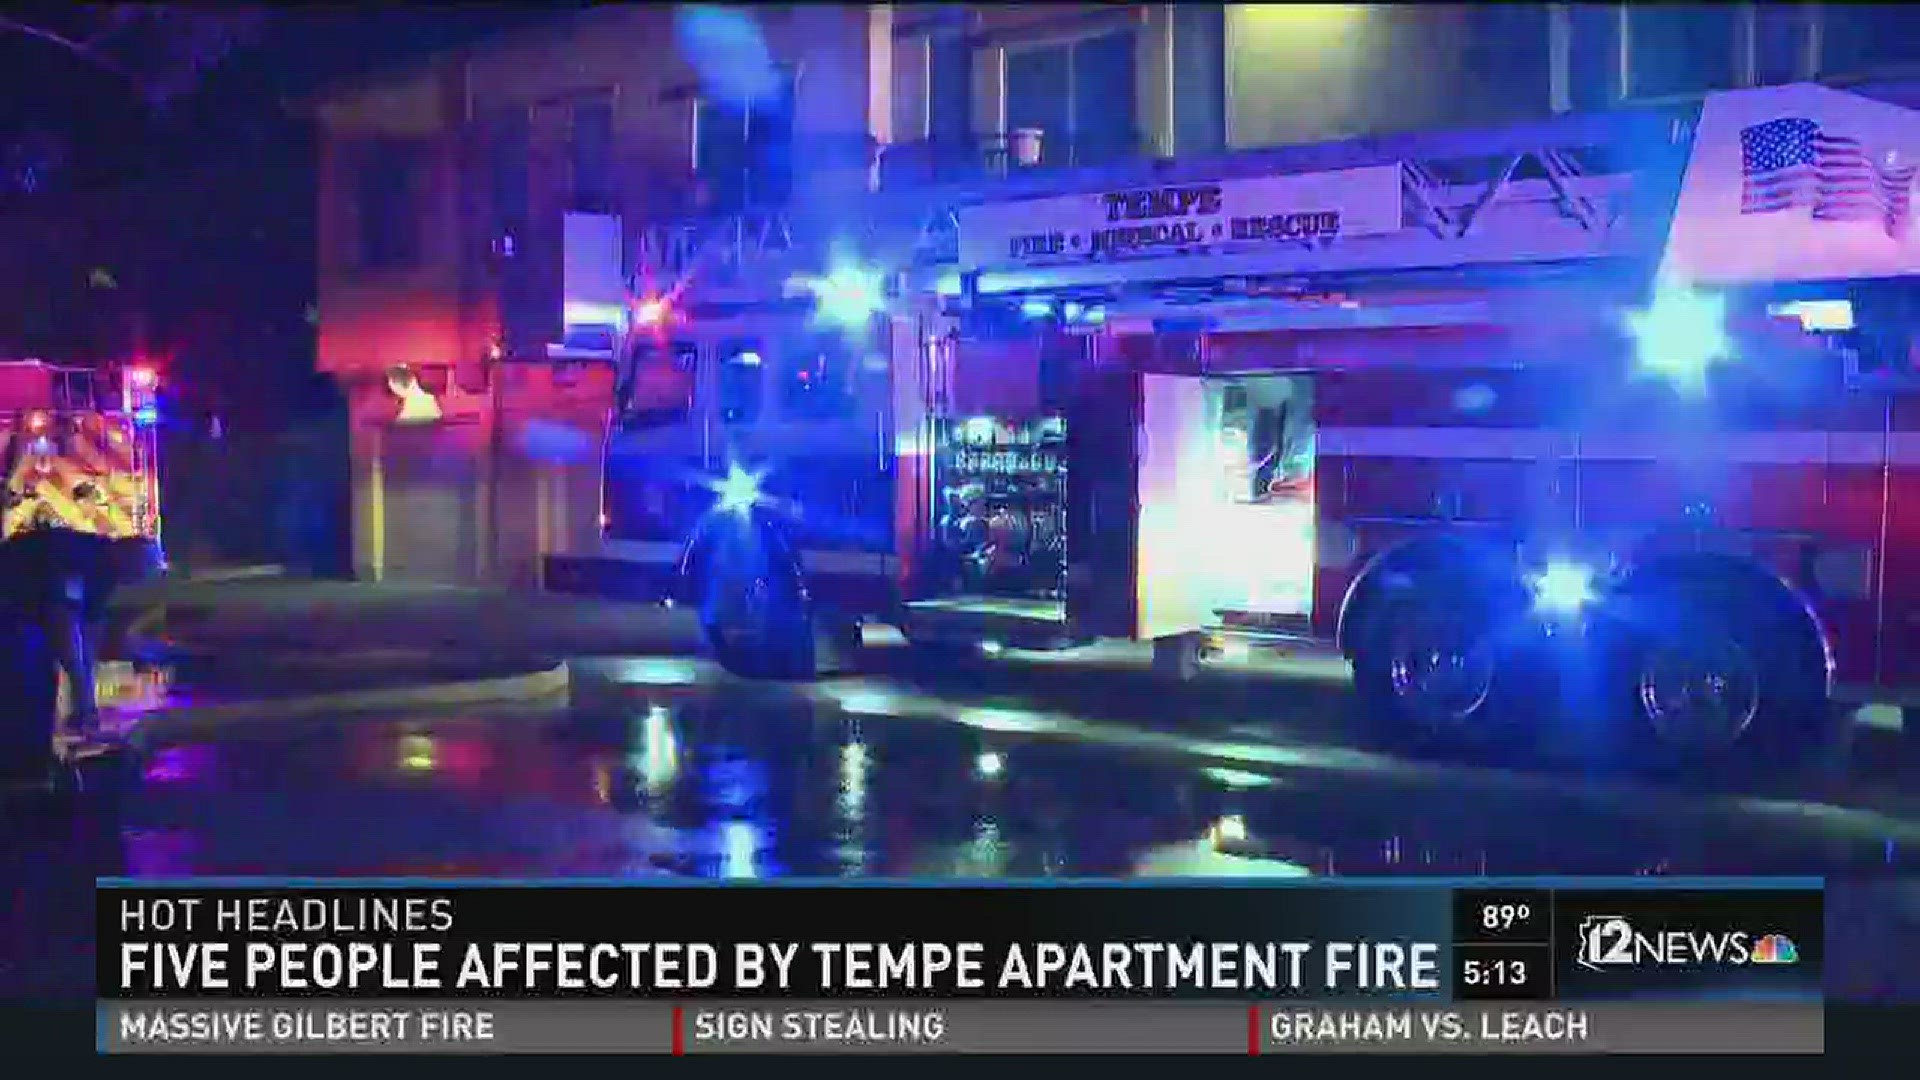 Five people affected by the apartment fire and damage.